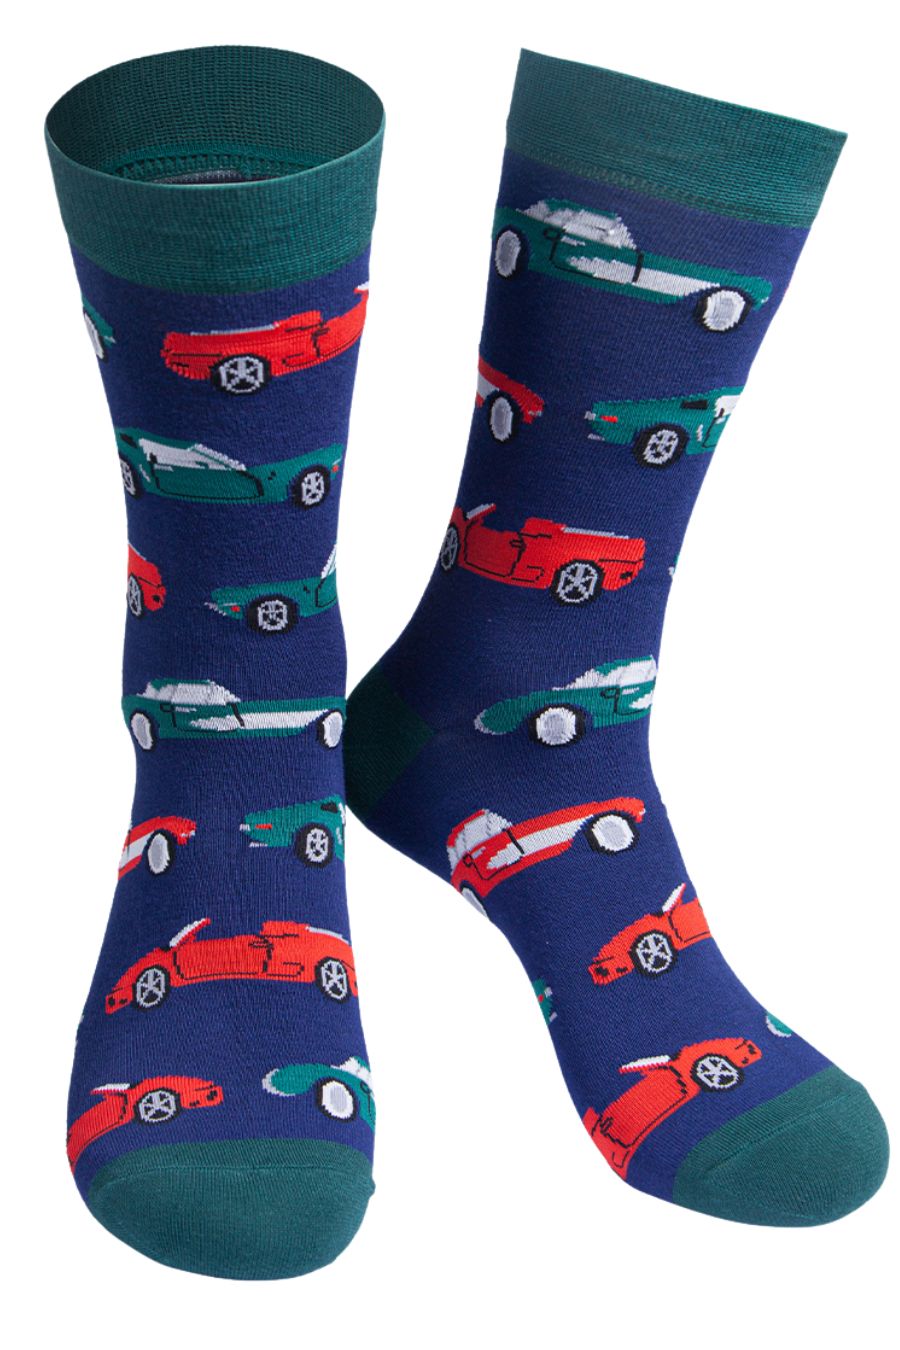 navy blue, green bamboo socks with a sports car pattern